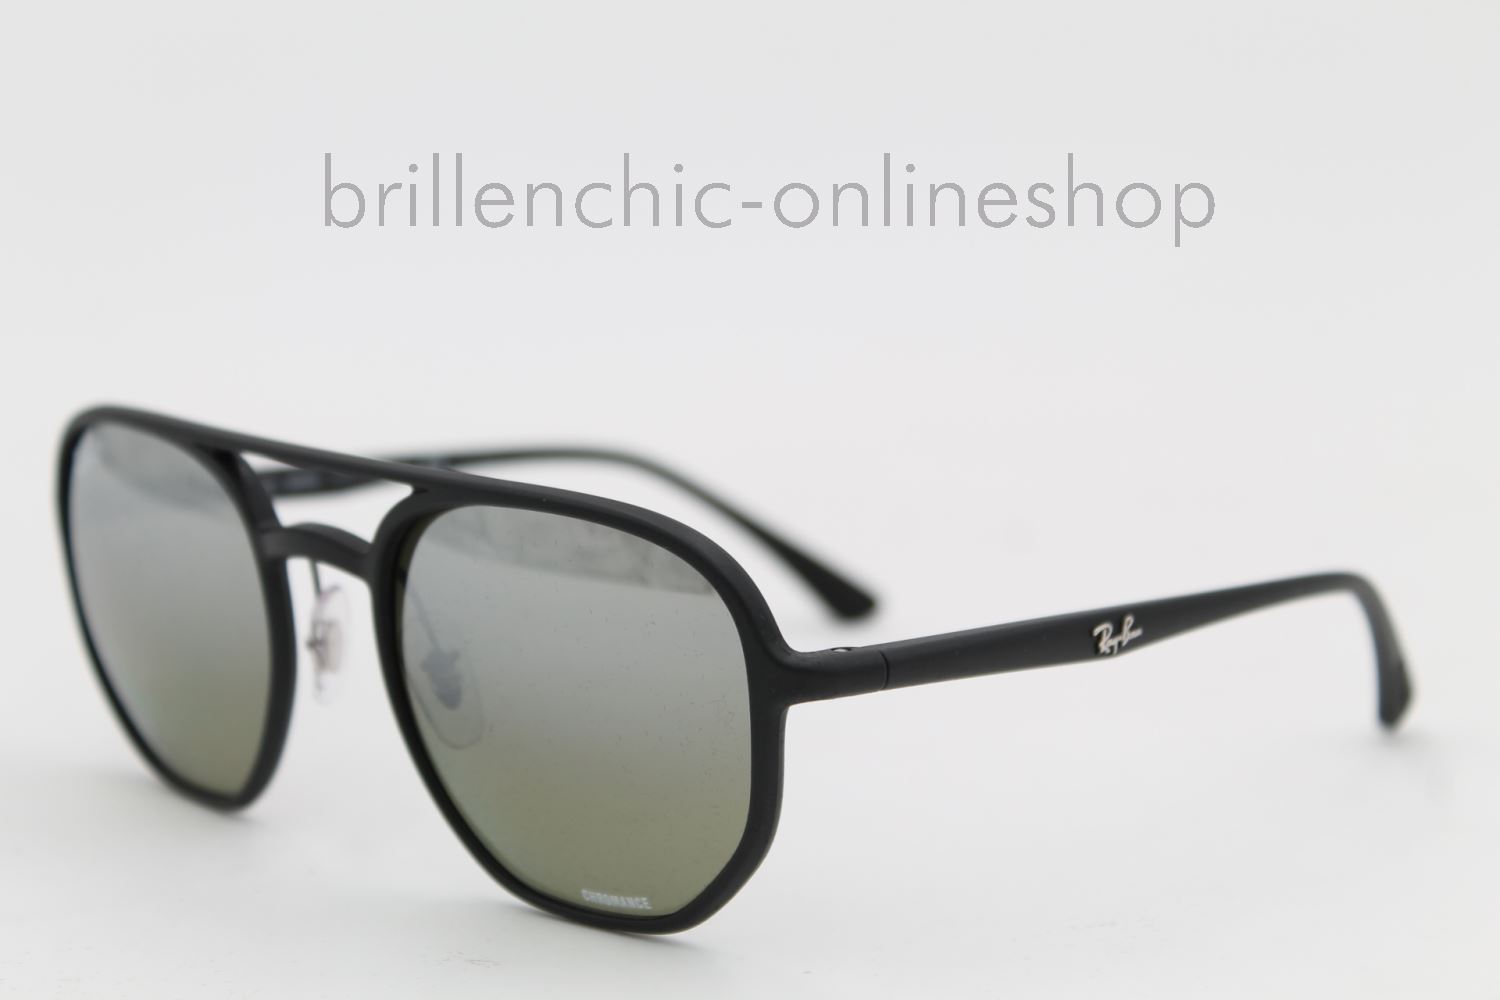 Brillenchic-onlineshop in Berlin - Ray Ban CHROMANCE RB 4321CH 4321 601/S5J  - POLARIZED 